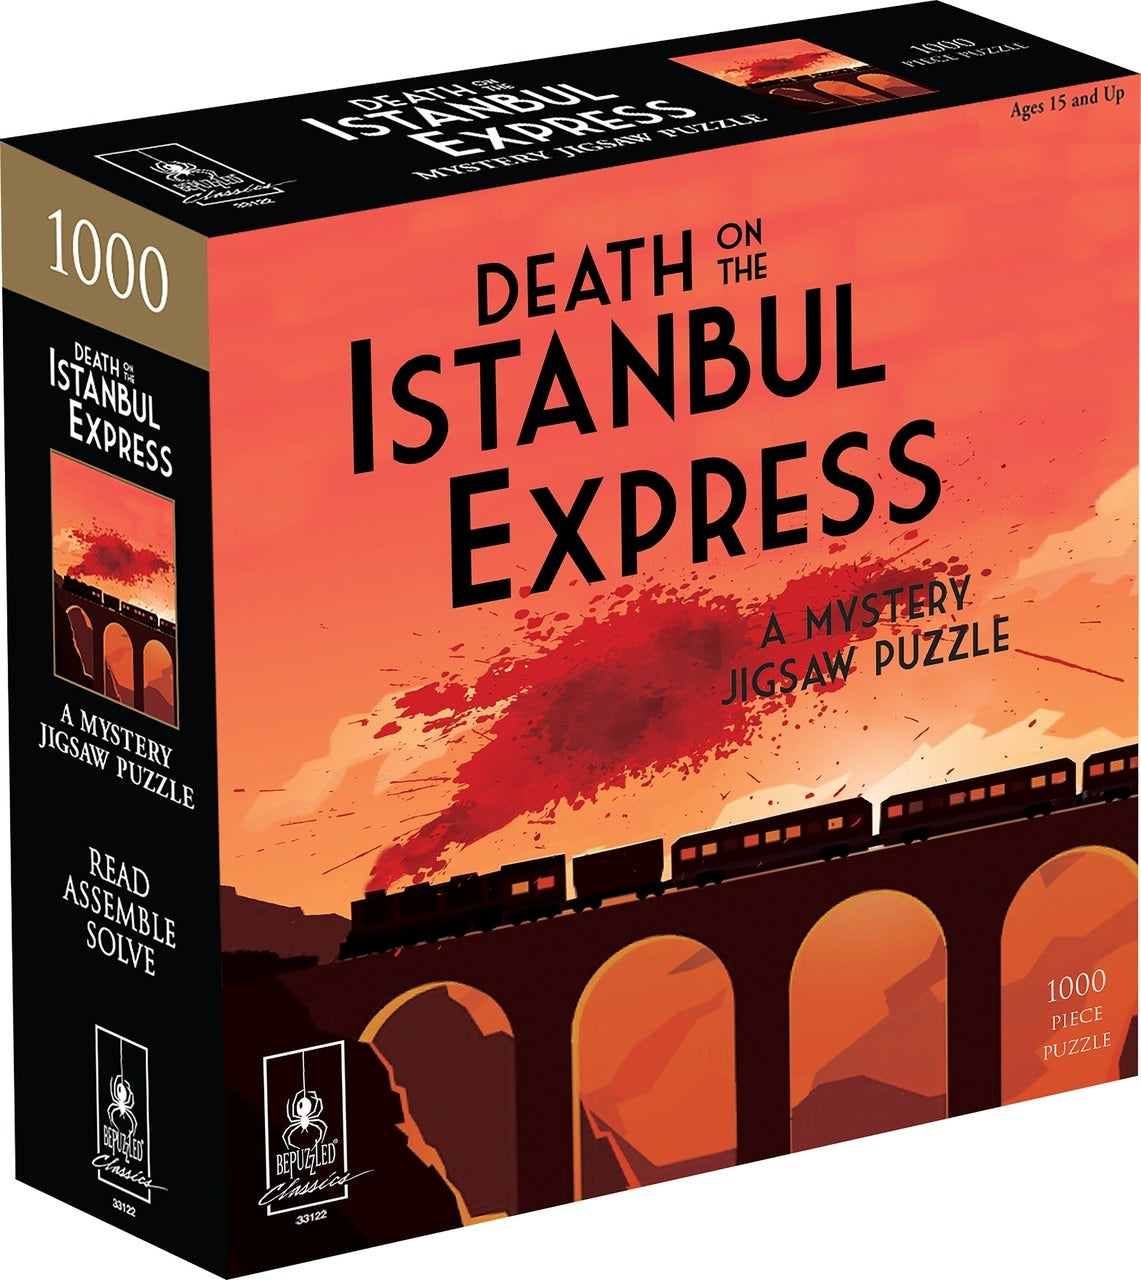 Death on the Istanbul Express Mystery Jigsaw Puzzle 1000pc